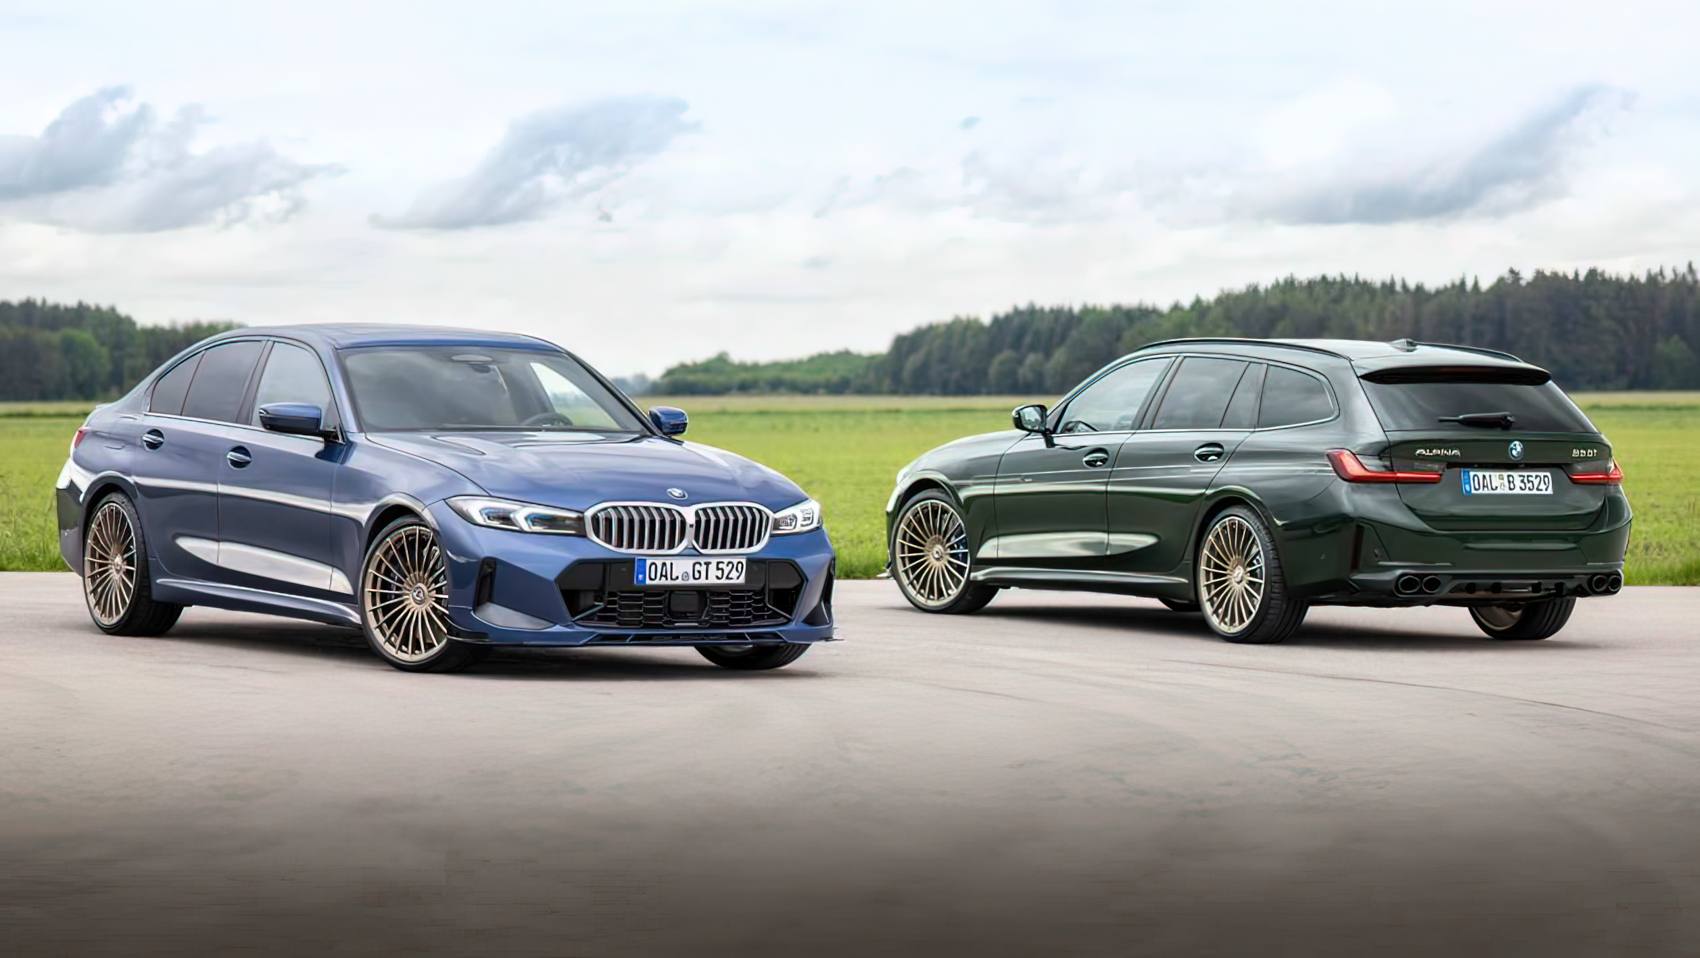 Alpina B3 GT and B3 GT Touring